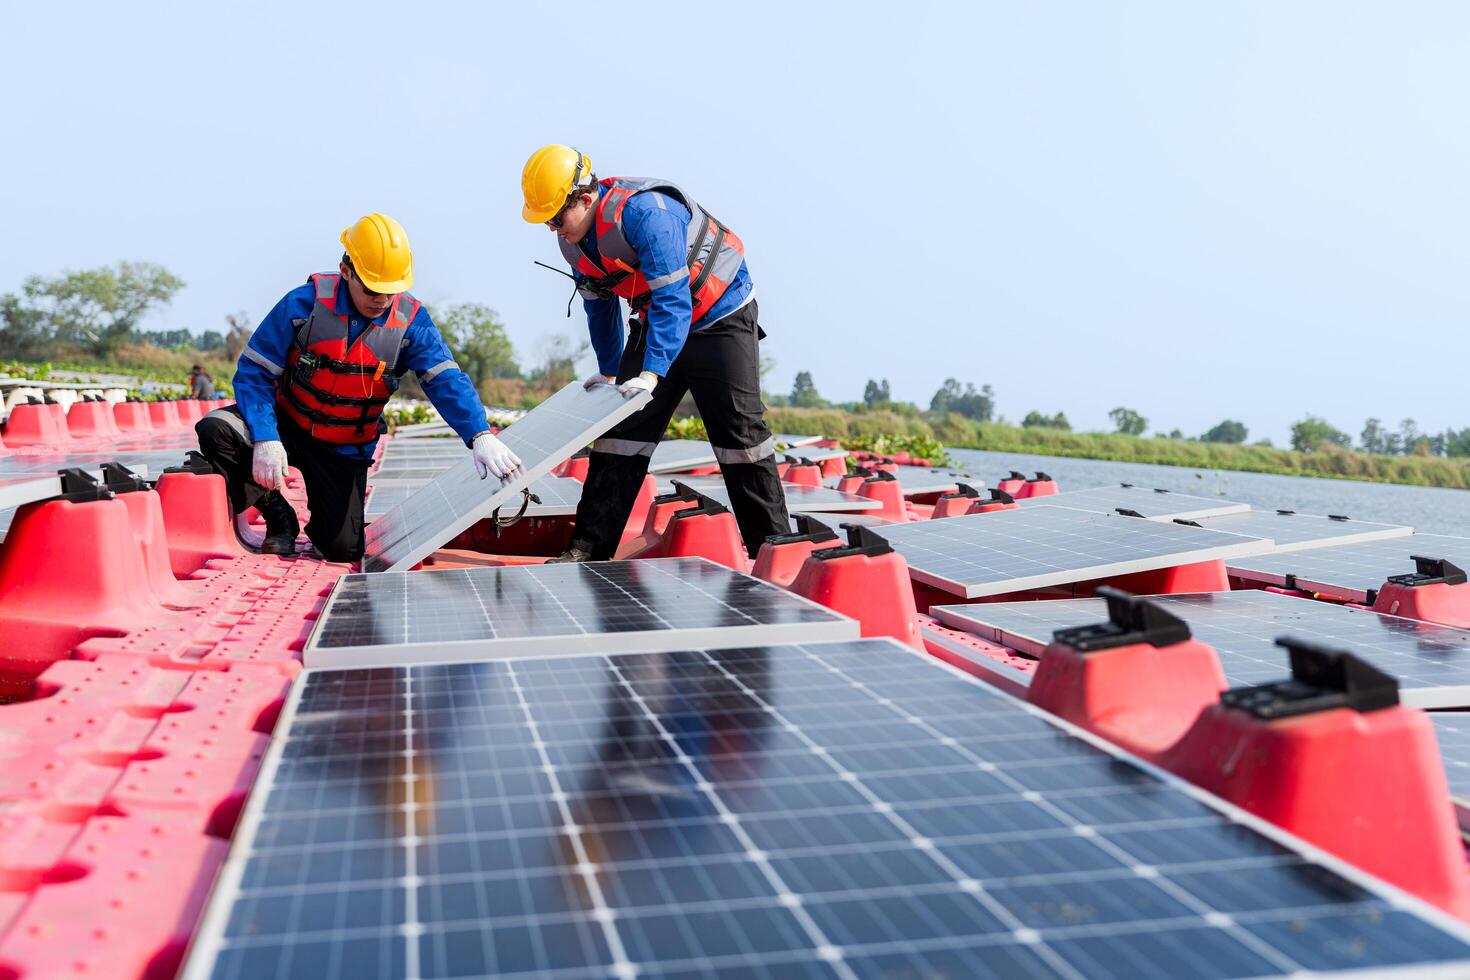 Photovoltaic engineers work on floating photovoltaics. workers Inspect and repair the solar panel equipment floating on water. Engineer working setup Floating solar panels Platform system on the lake. photo